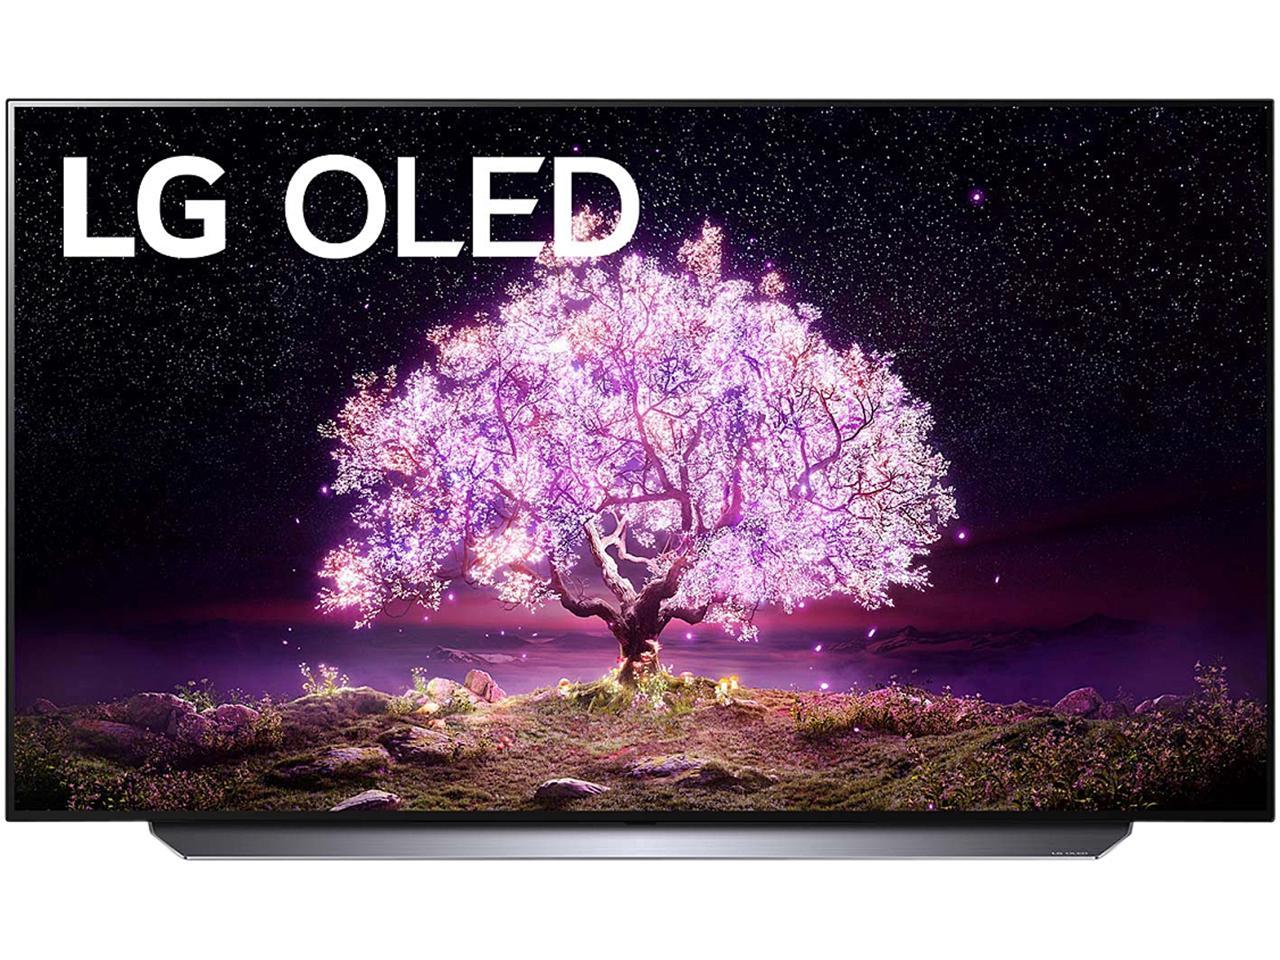 LG 77" OLED77C1 $2996.99 + $300 GC + 4 Year Warranty w/ Burn In Coverage + Nvidia Ge-Force Streaming Credit + FS